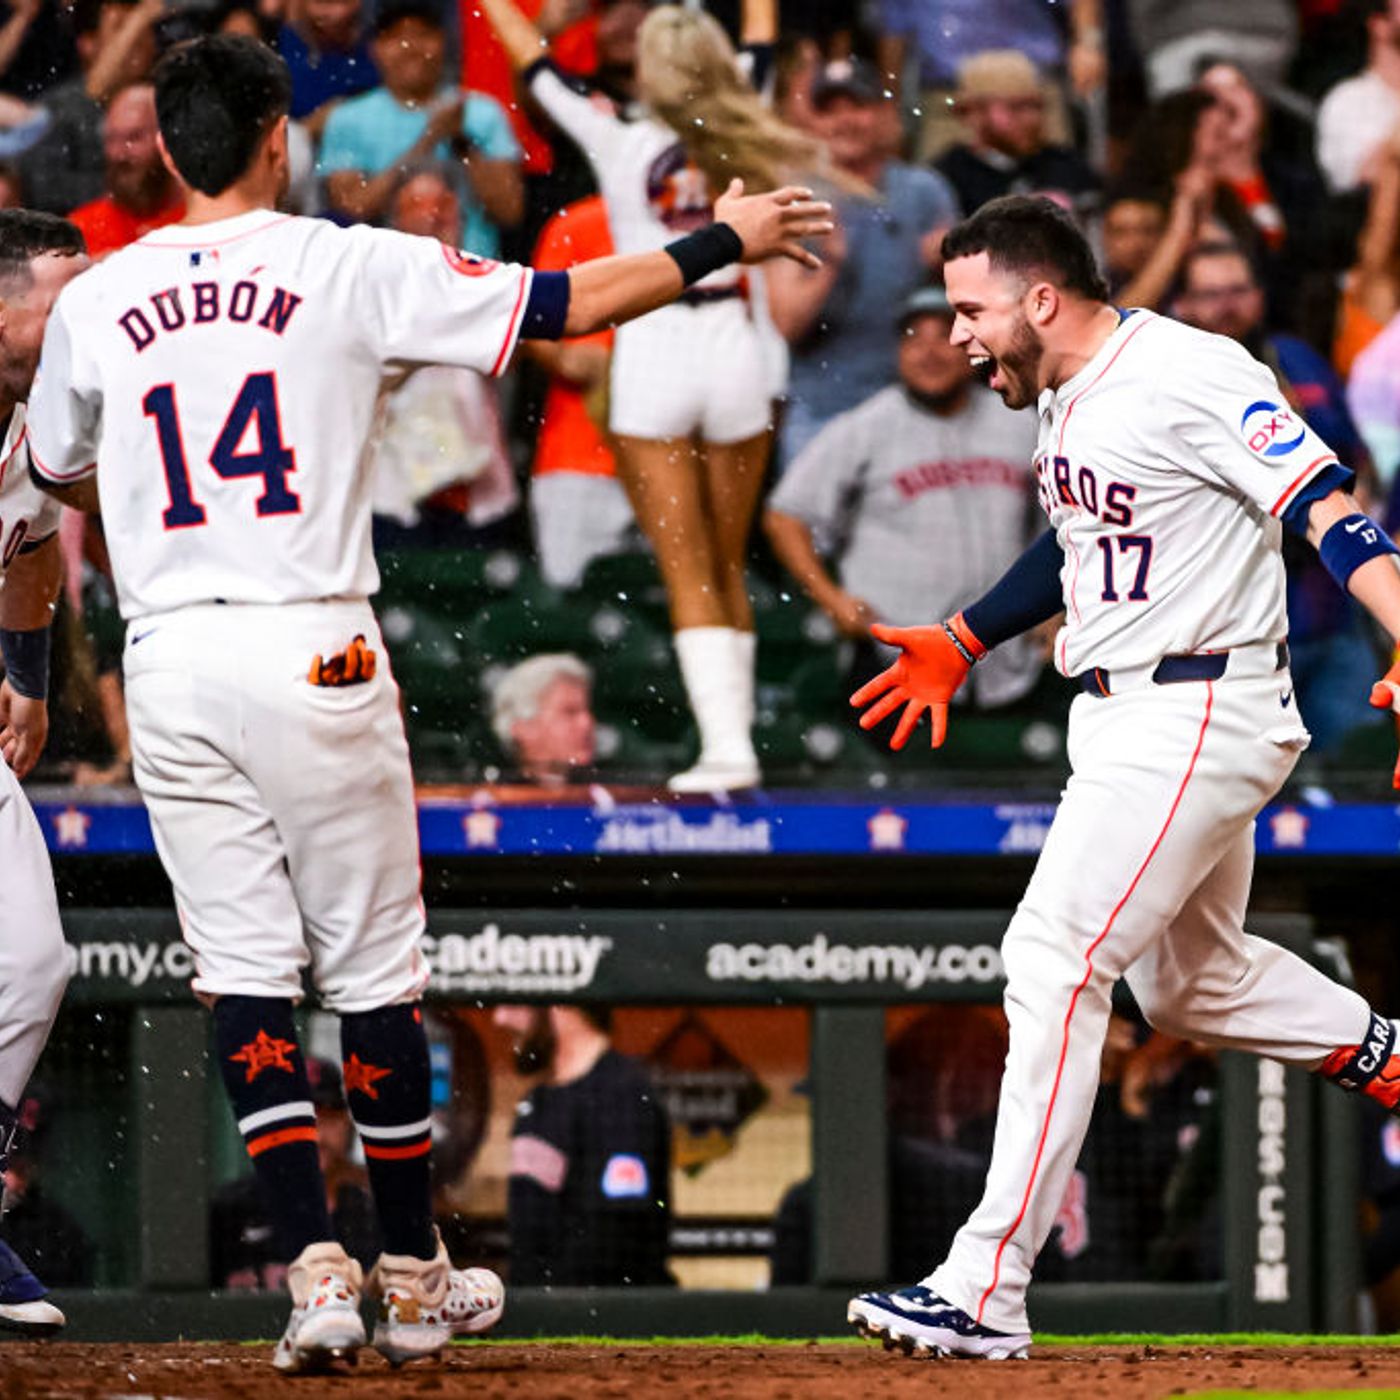 Astros Win With Caratini Walk-Off Homer, UH Cougars Challenging NFL With Blue Uniforms